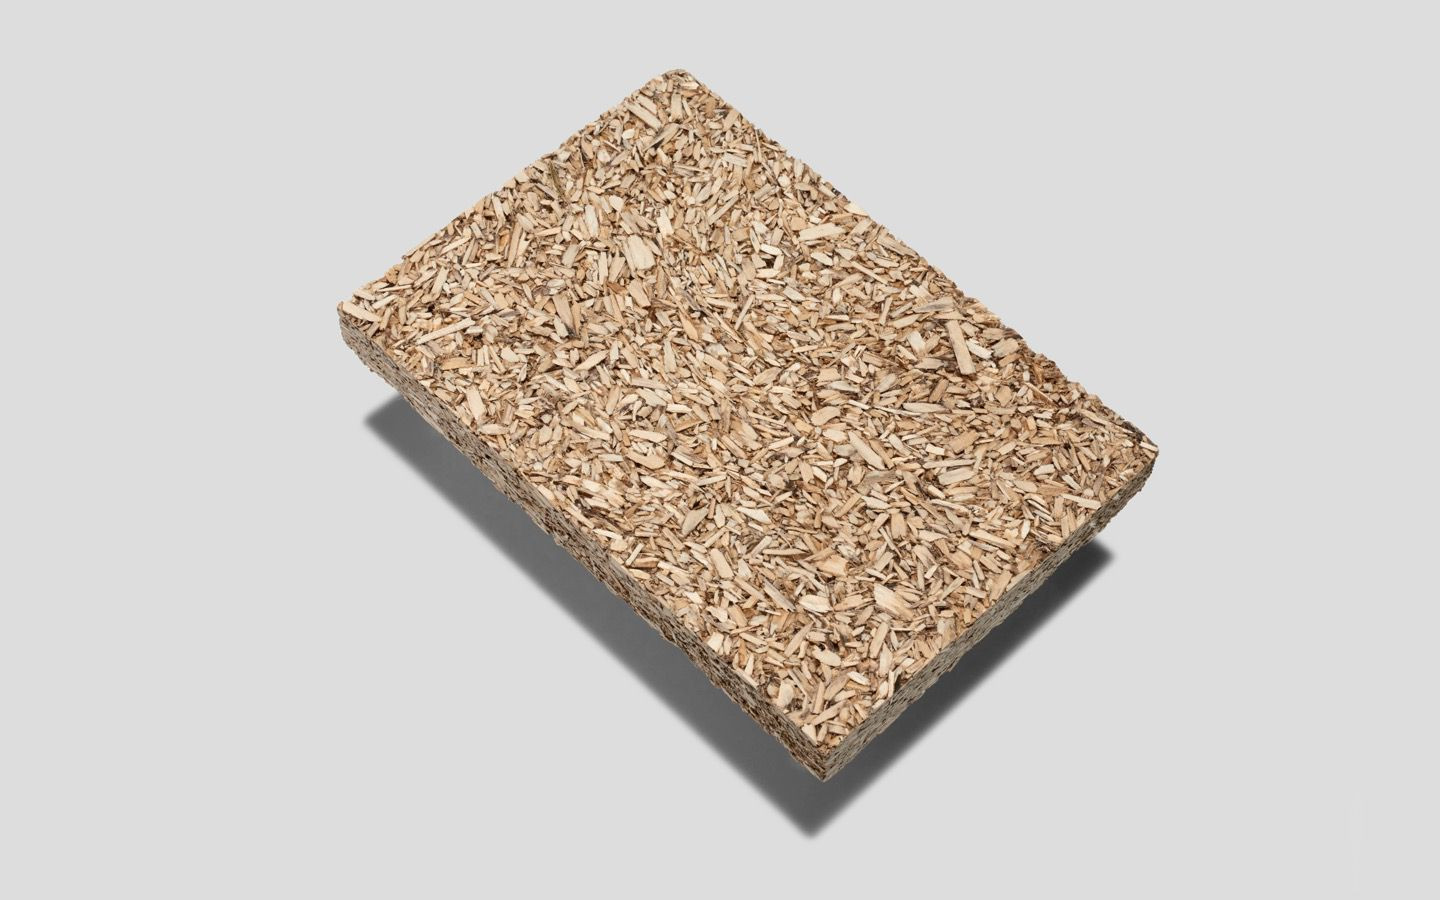 Compostboard